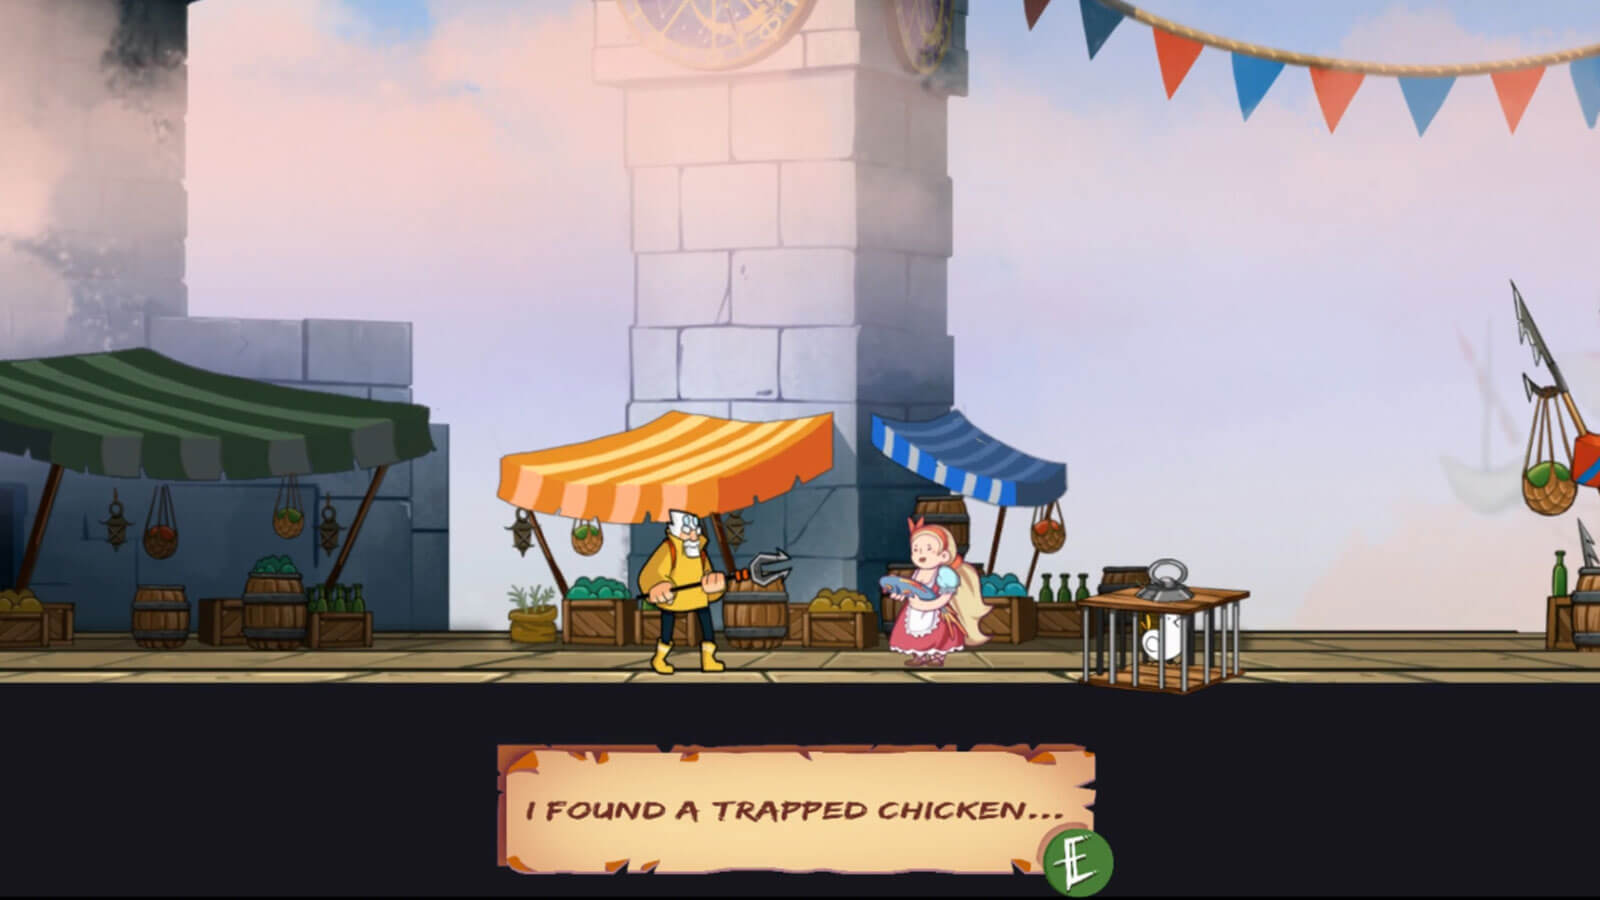 A player holding a pike speaks with a NPC inside a town, stating I found a trapped chicken...